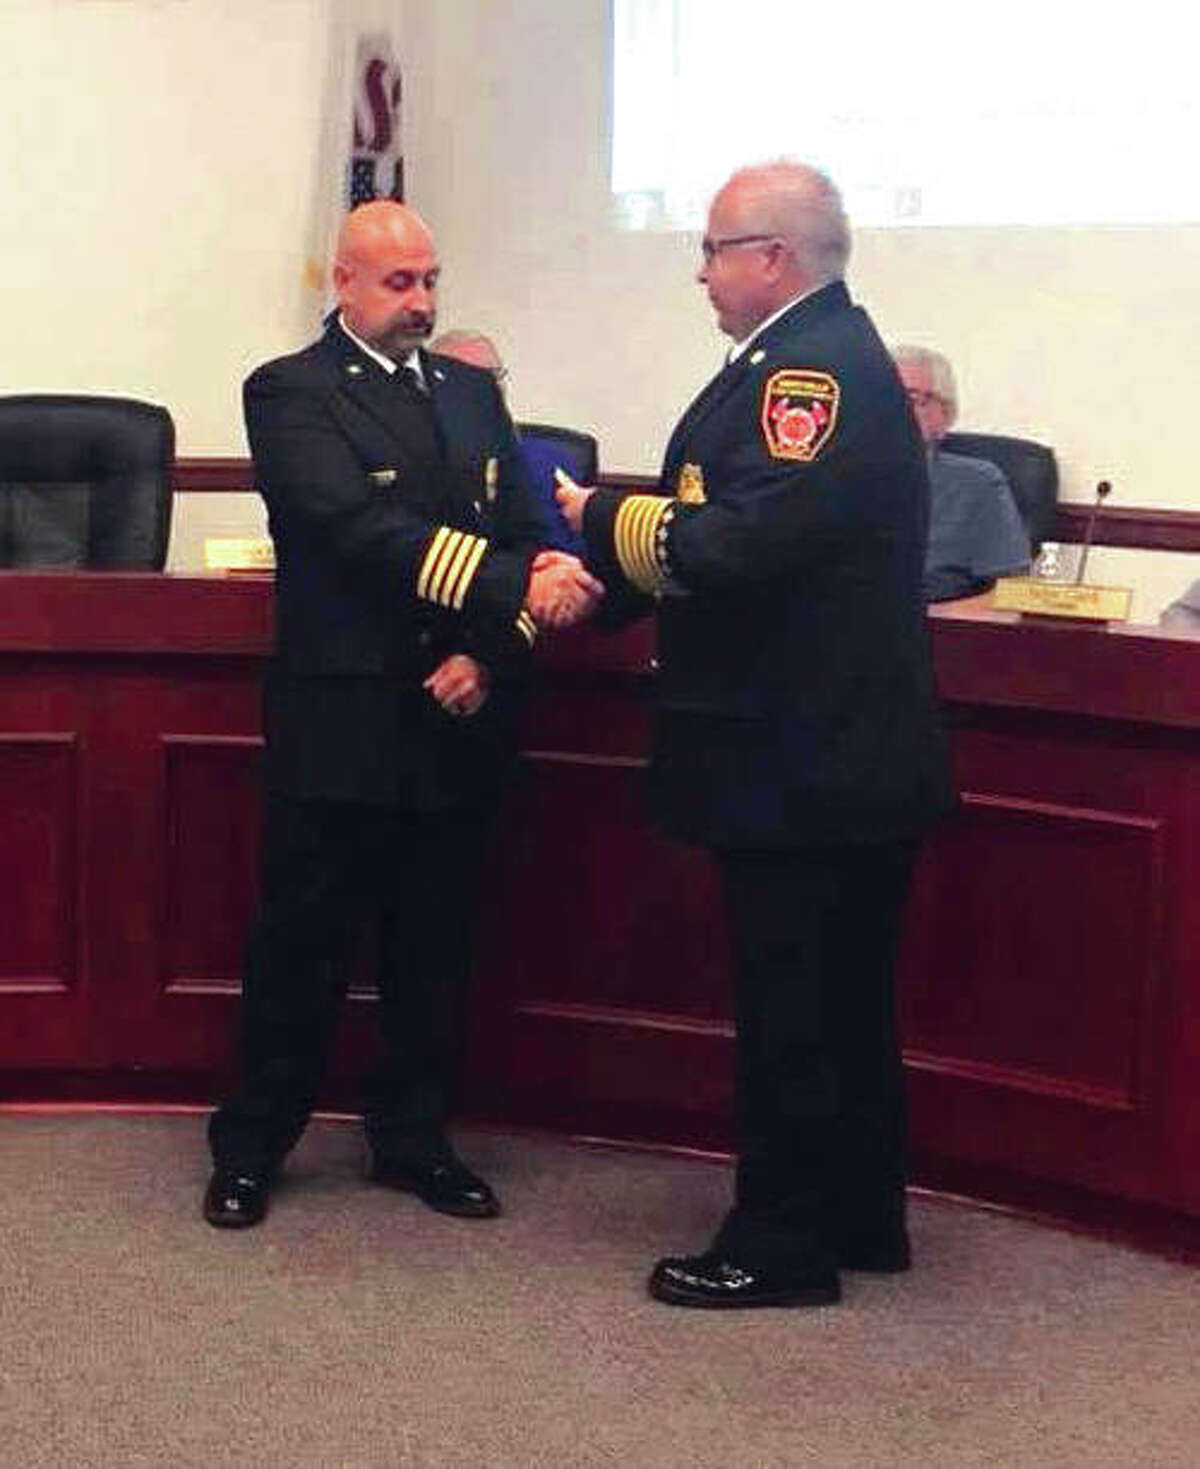 Maryville Fire Chief Kevin Flaugher, right, presents George May with his Deputy Fire Chief badge at the last regular meeting of the Maryville Board of Trustees . May was appointed to serve as the full-time Deputy Chief of the Maryville Fire Department.